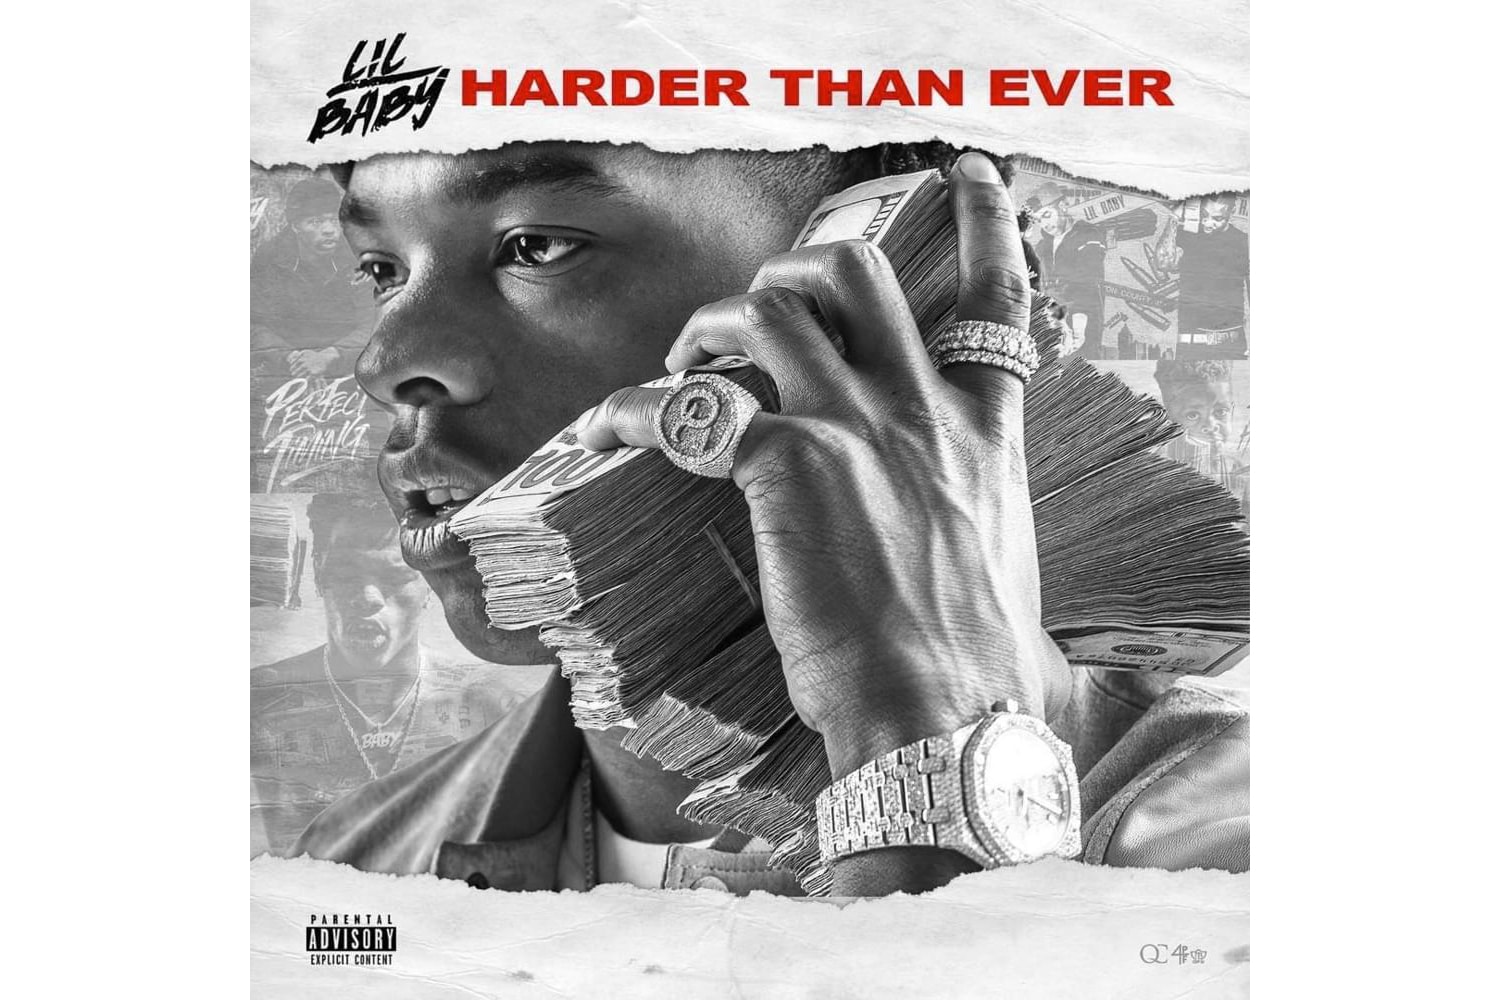 Lil Baby Harder Than Ever Tracklist track list 2018 release date info drop